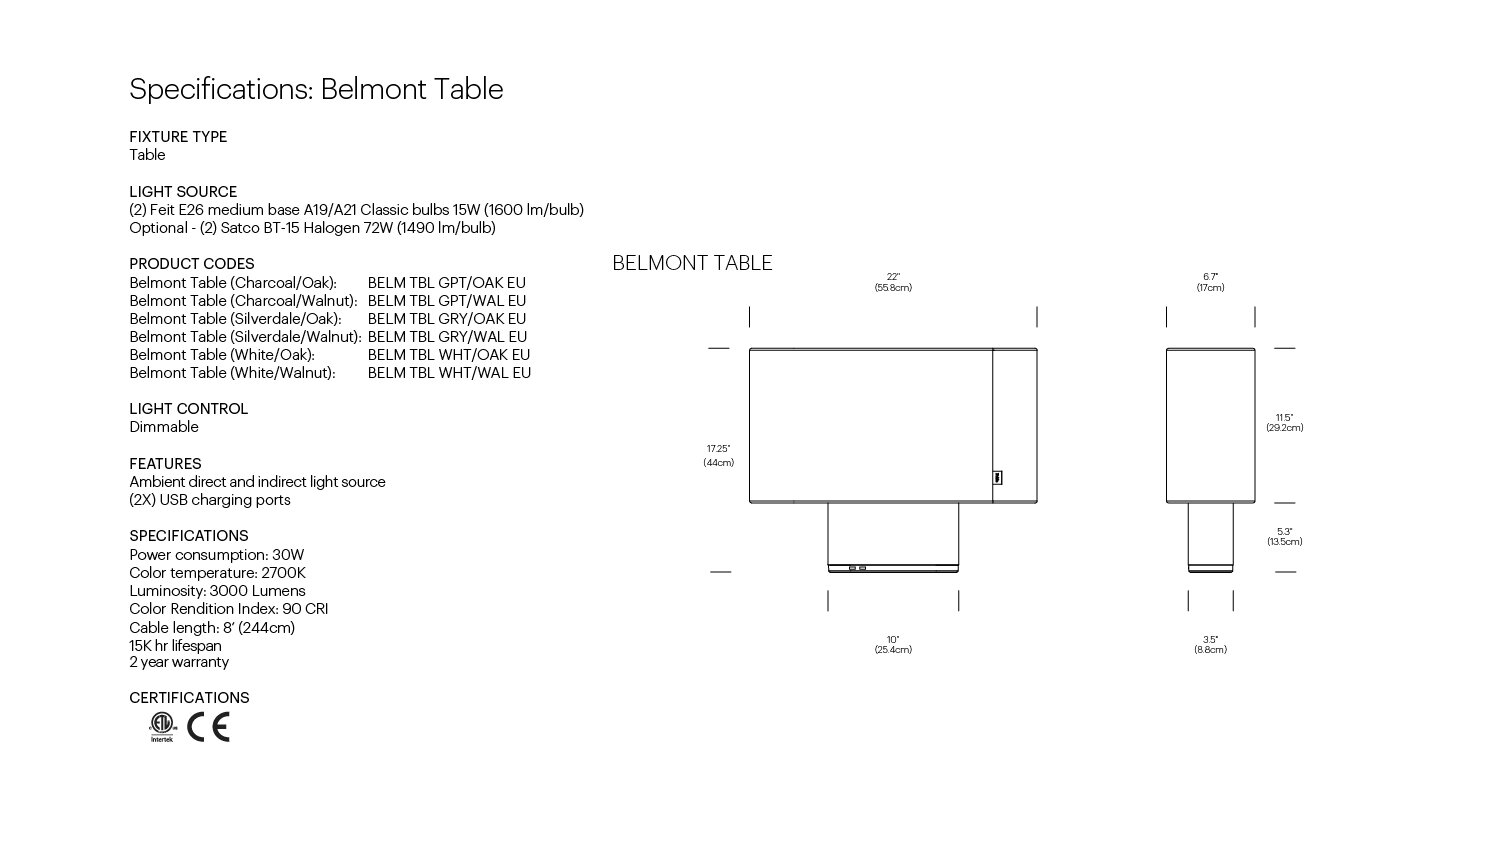 Pablo Designs Belmont Floor and Table Spec Sheets for EU-02.jpg